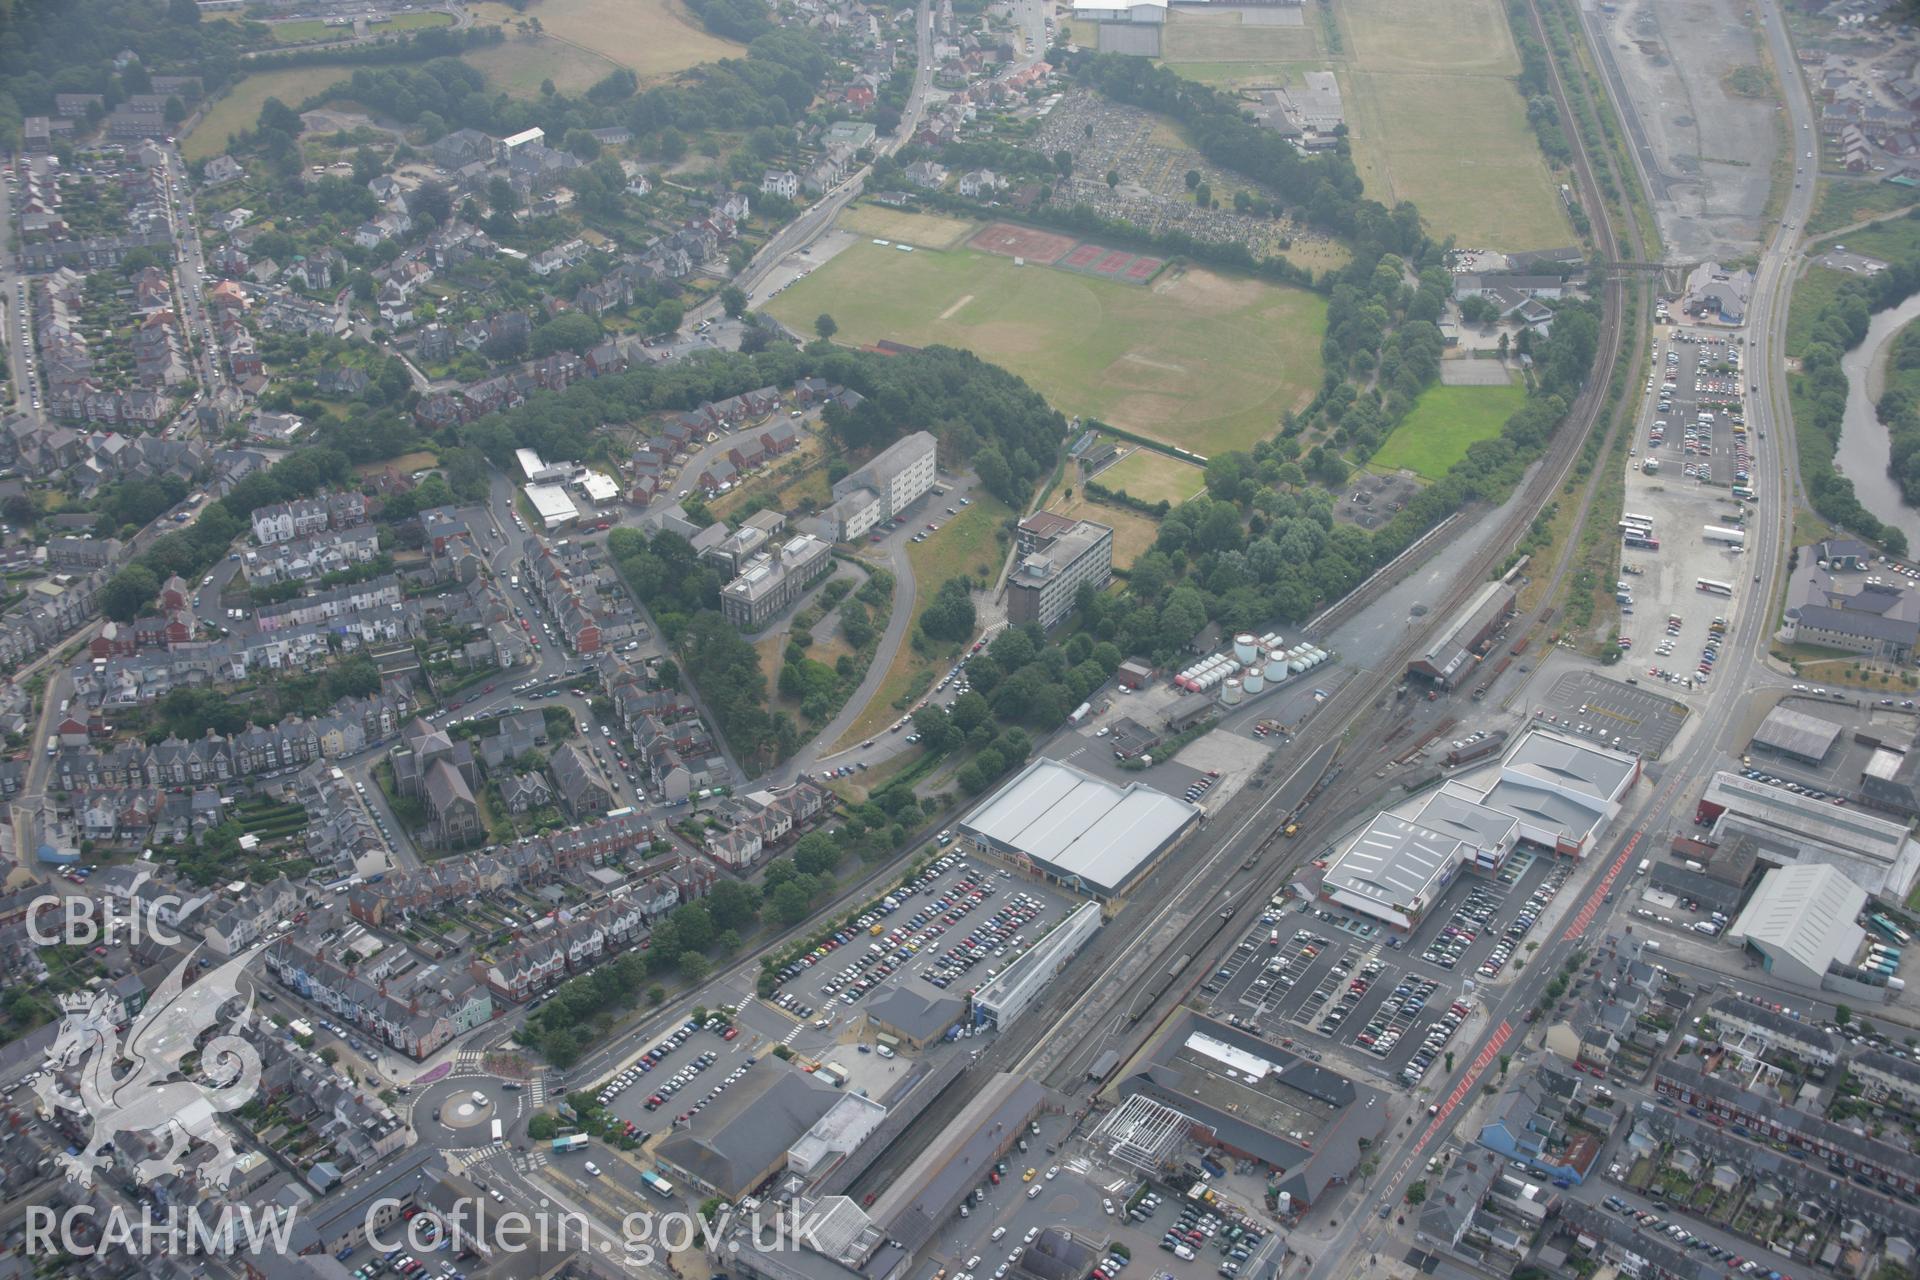 RCAHMW colour oblique aerial photograph of Aberystwyth. Taken on 21 July 2006 by Toby Driver.